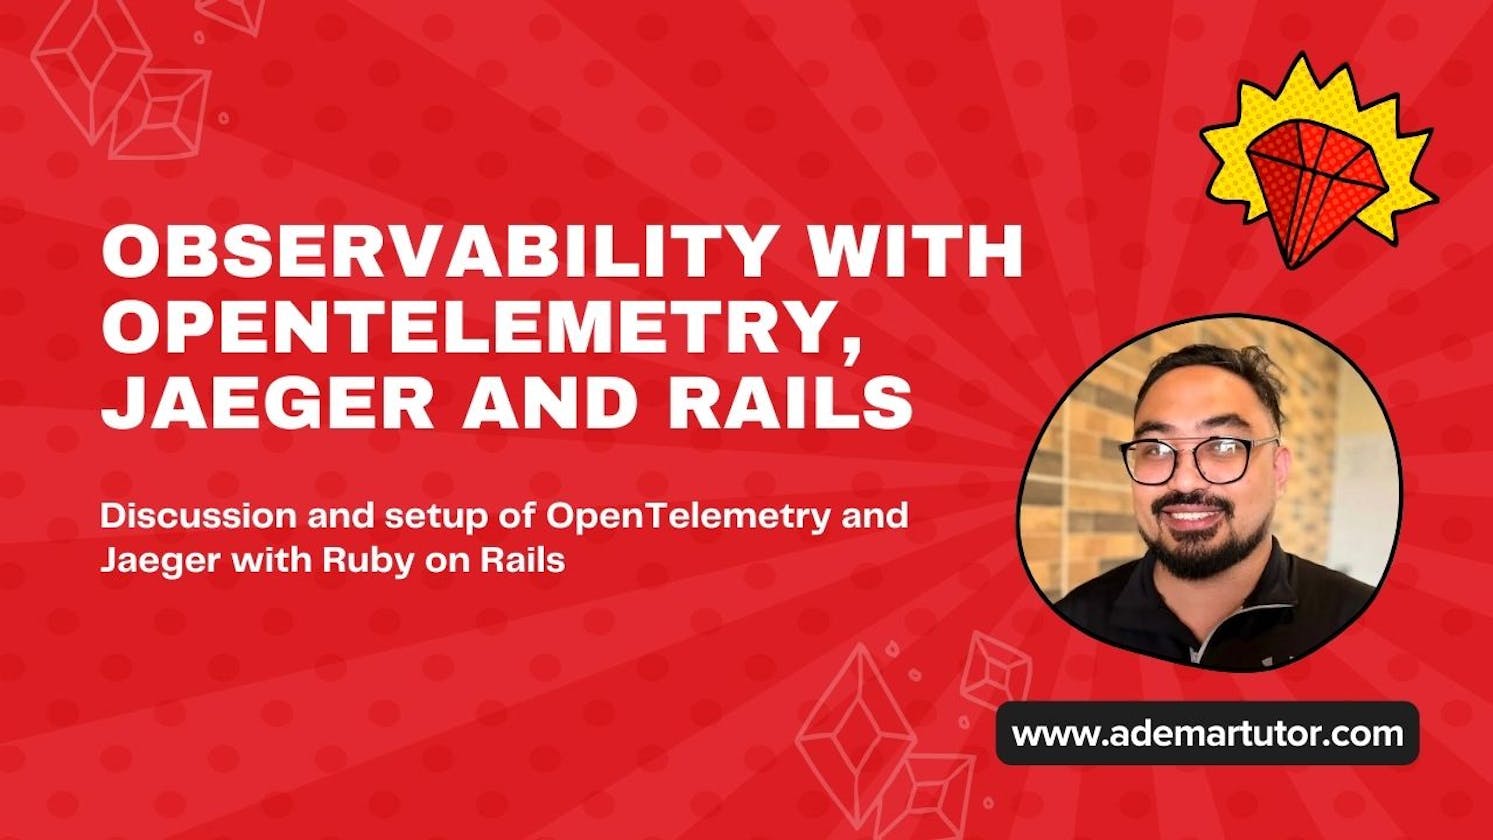 Observability with OpenTelemetry, Jaeger, and Rails